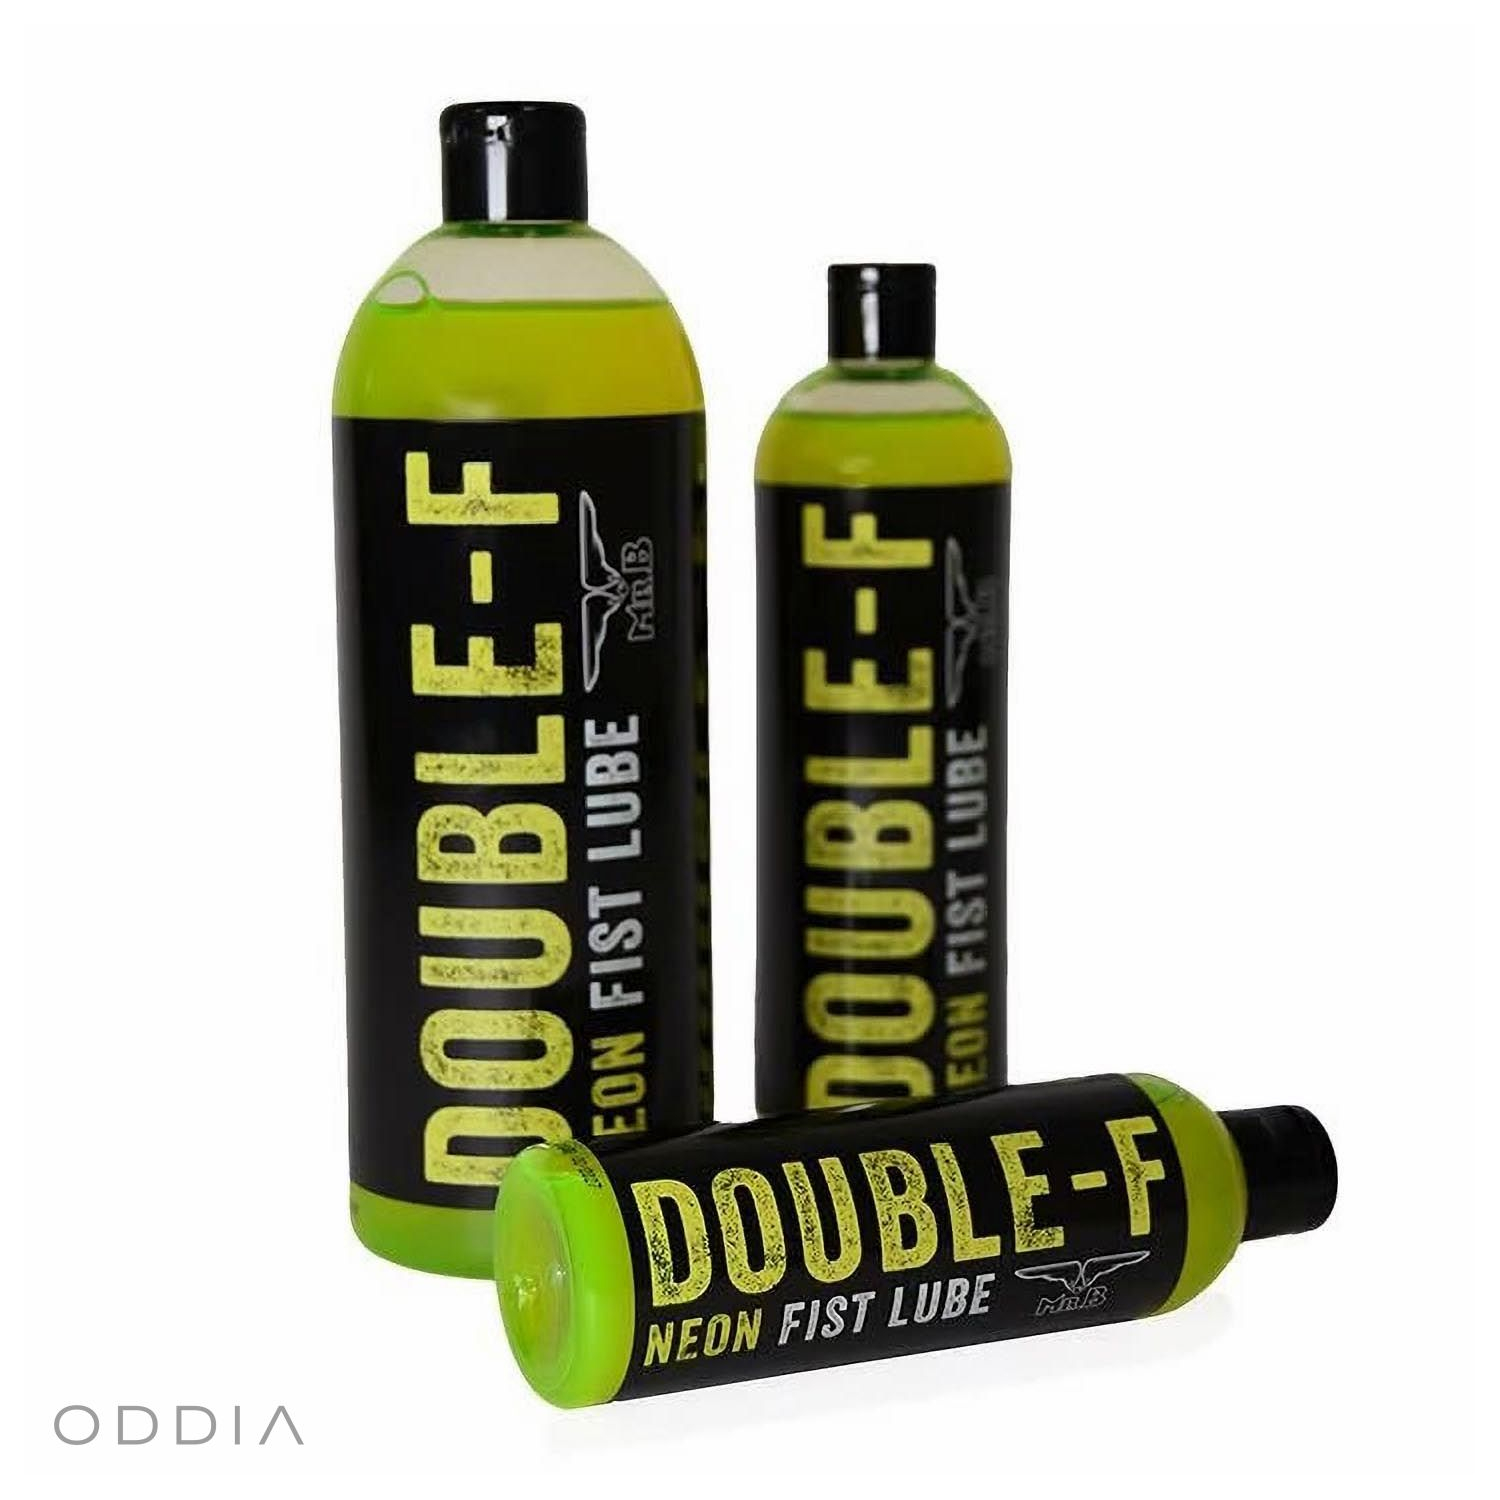 Bottle with glowing green lubricant gel designed for fisting